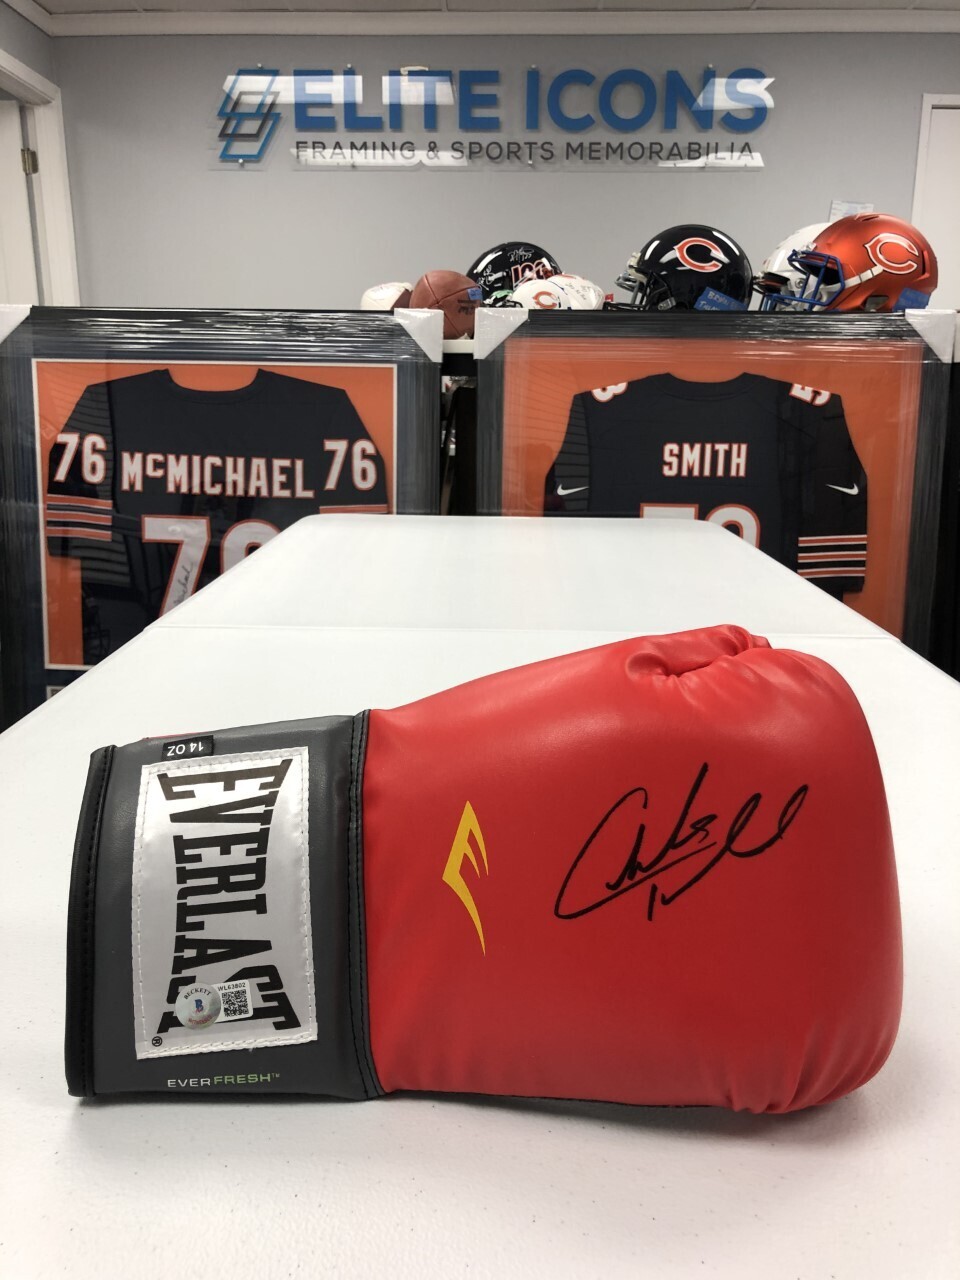 Charles Tillman Signed Red Boxing Glove